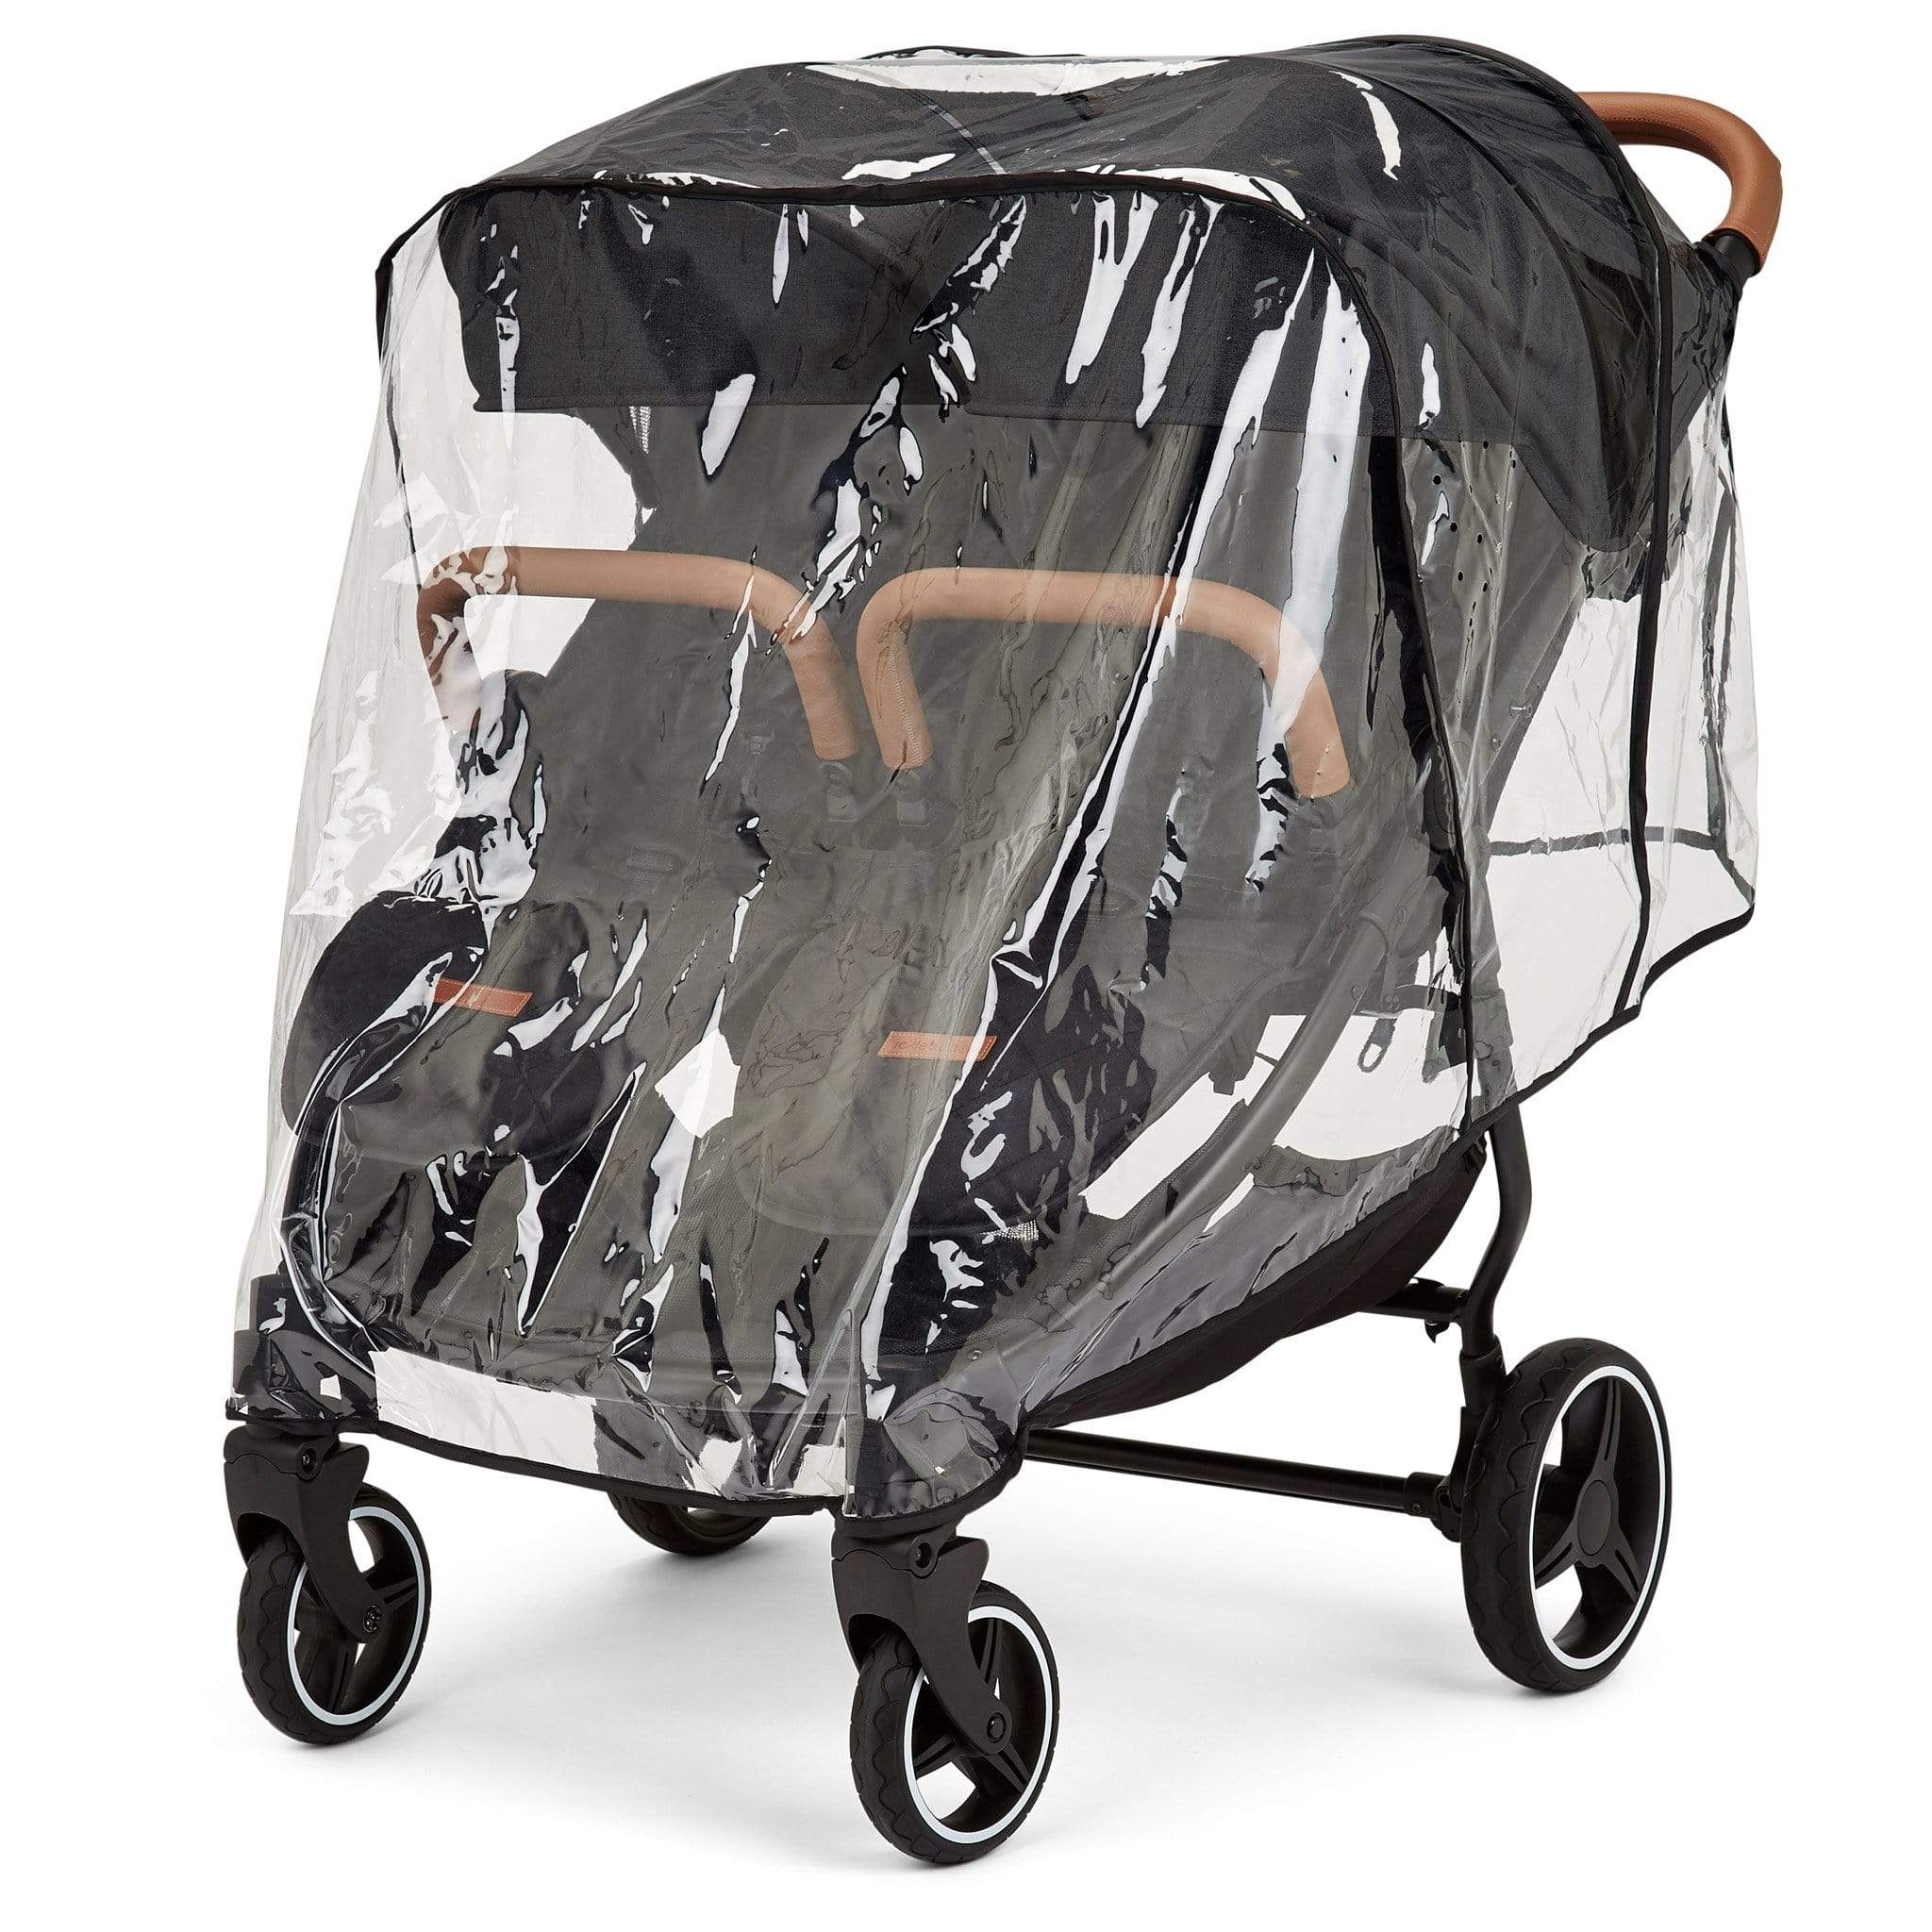 Ickle Bubba double buggies Ickle Bubba Venus Double Stroller Black/Black/Tan 16-004-100-003